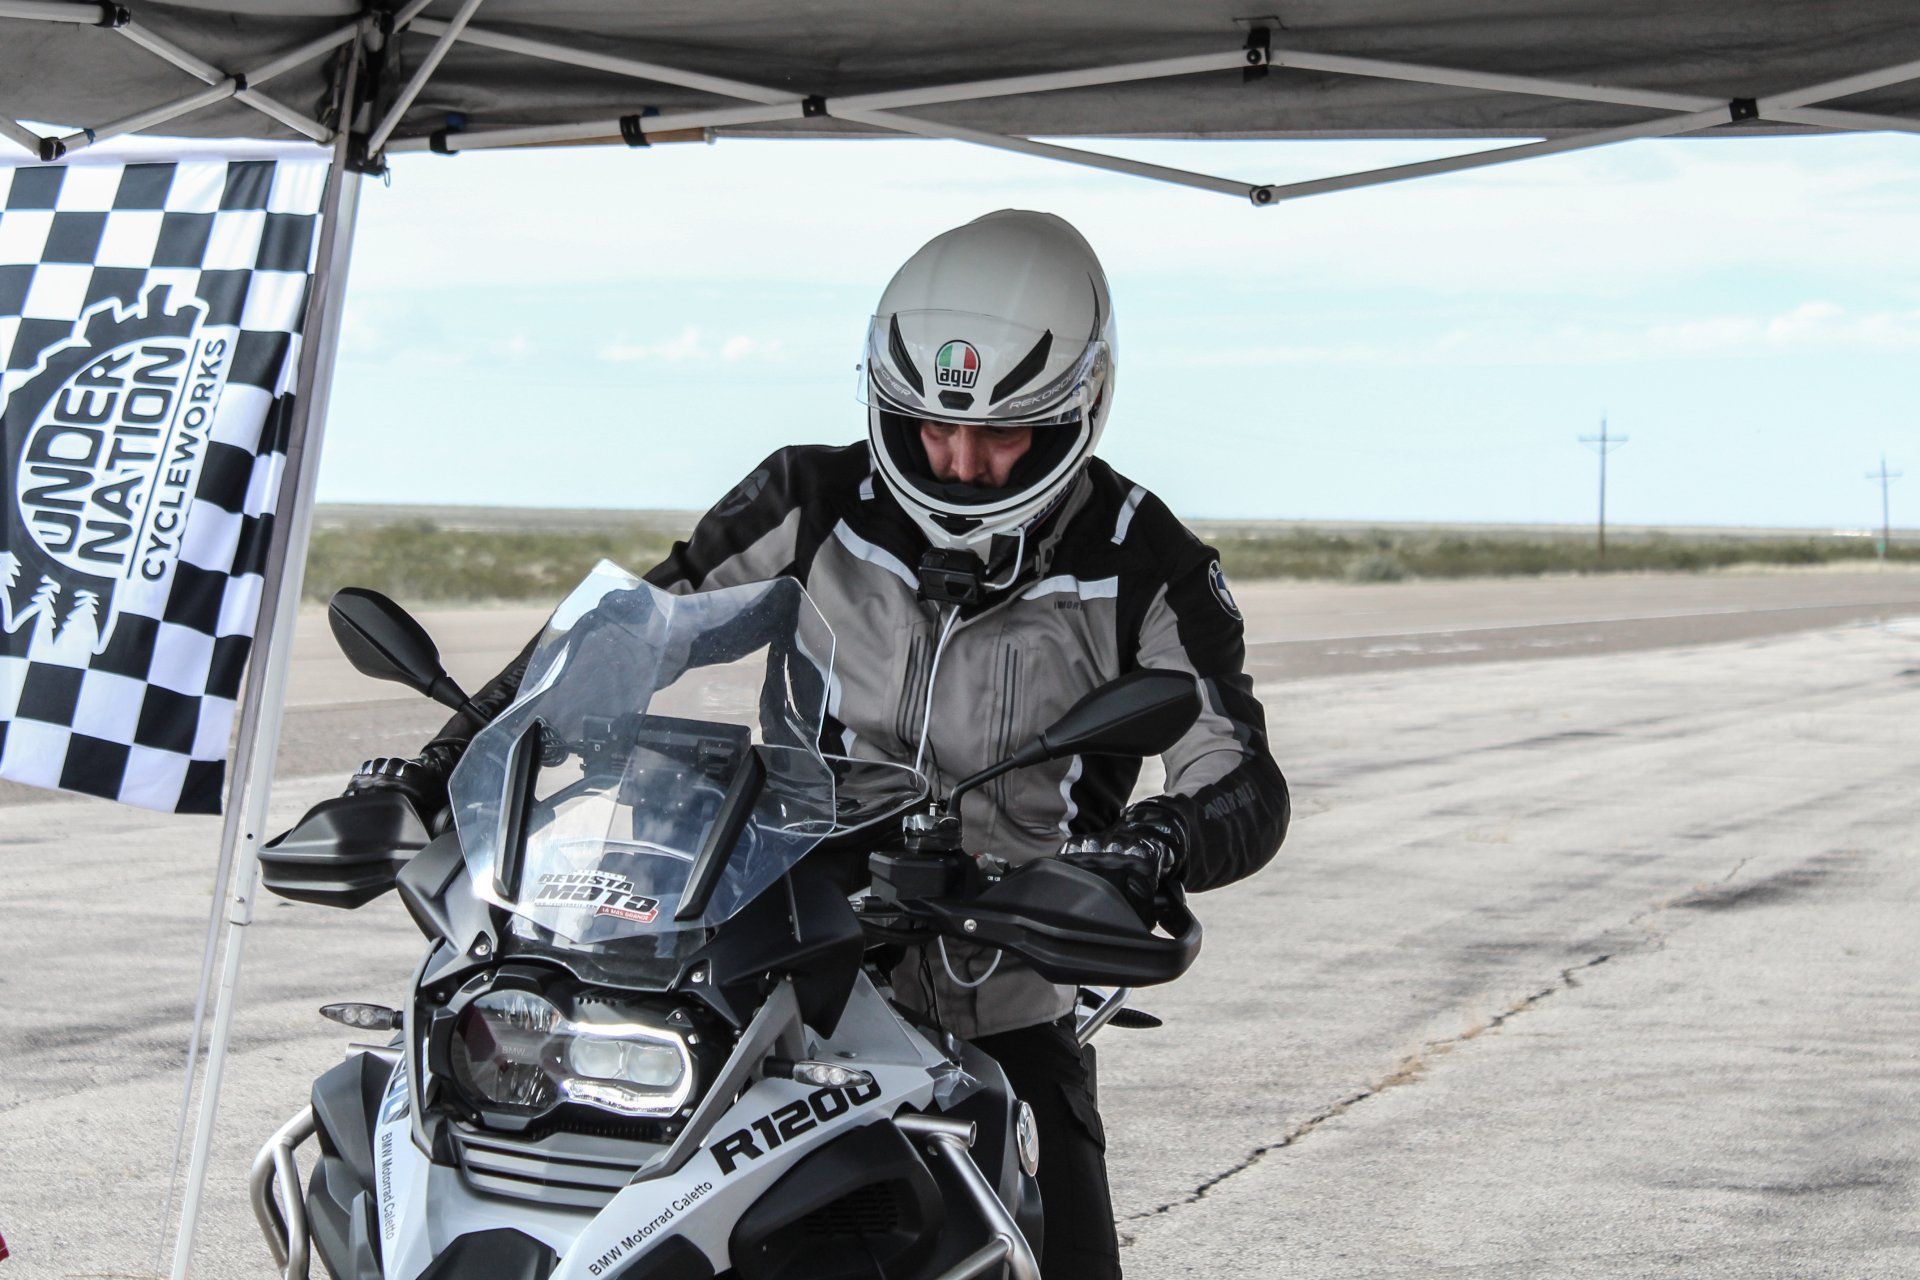 Greatest distance on a motorcycle in 24hrs: world record set by Eduardo Antillon